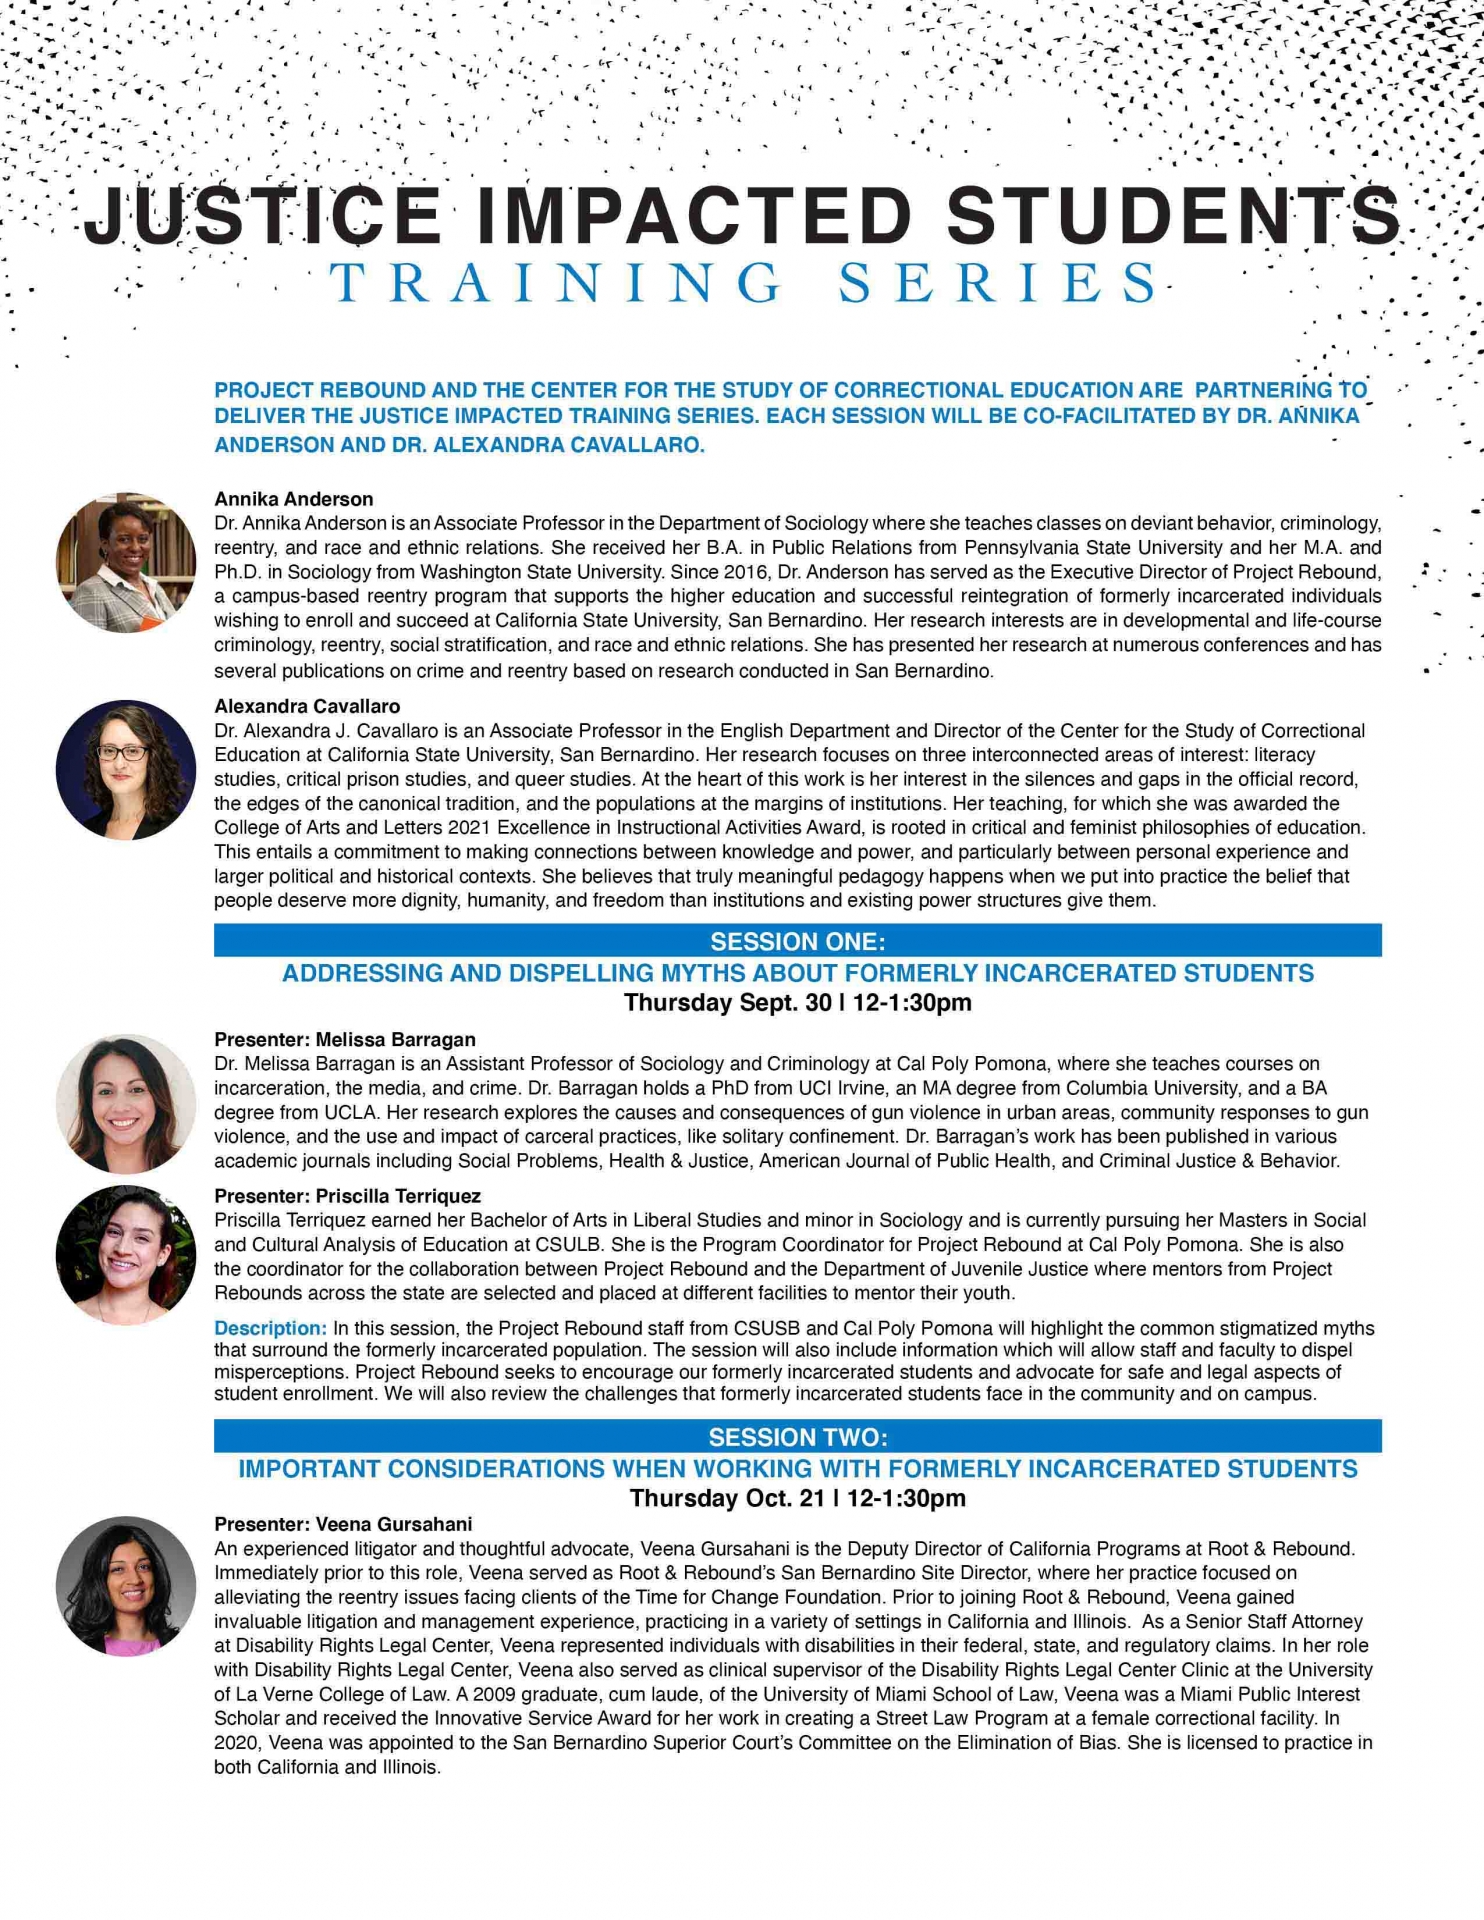 ​​​​Justice Impacted Students Training Series flier 1